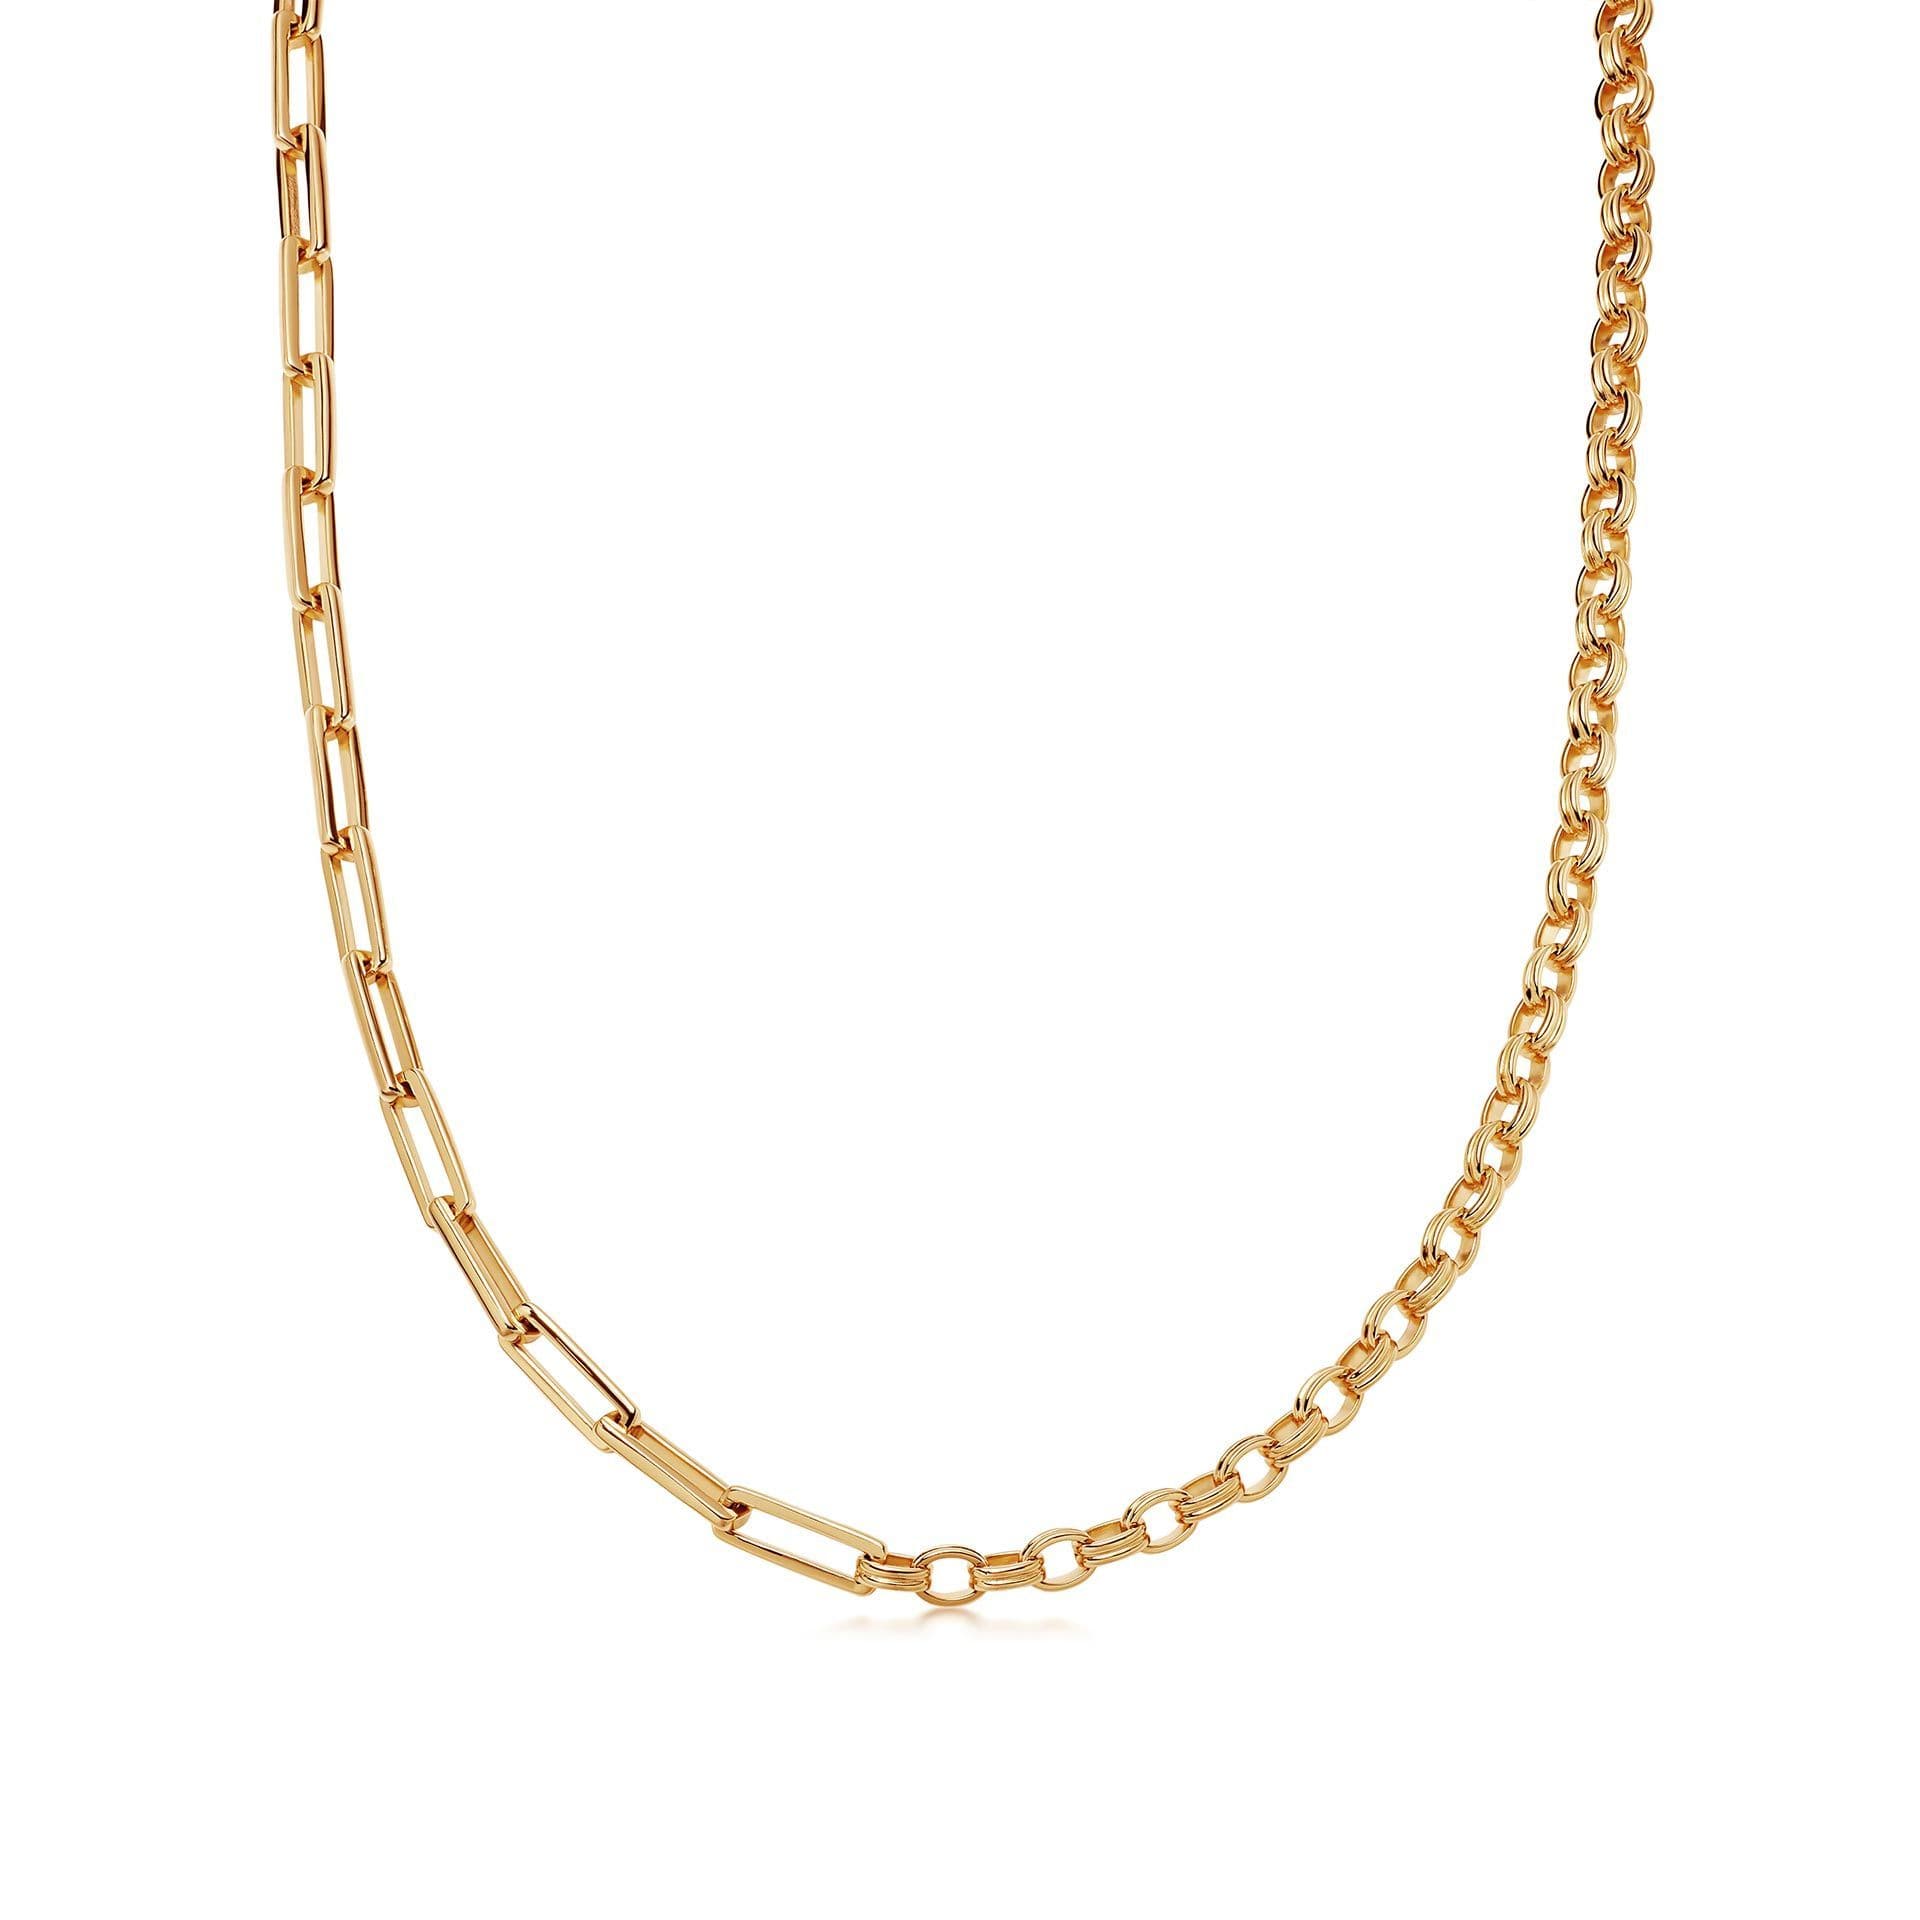 Deconstructed Axiom Chain Necklace -sales